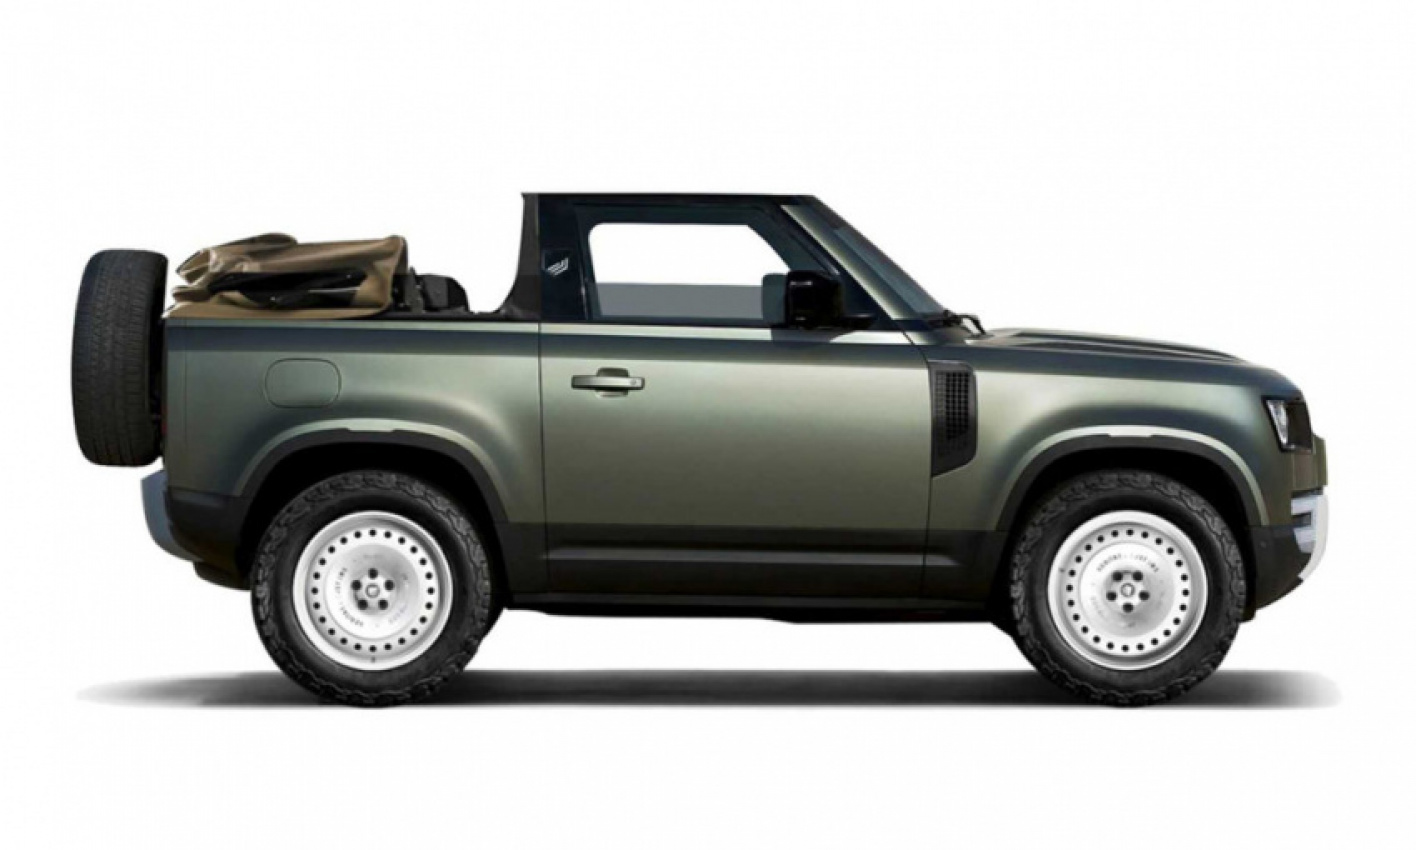 all news, autos, cars, coachbuilders, defender, defender 90, defender convertible, drop top defender, dutch, heritage customs, land rover, land rover defender 90, this drop-top defender is like an evoque convertible but utilitarian